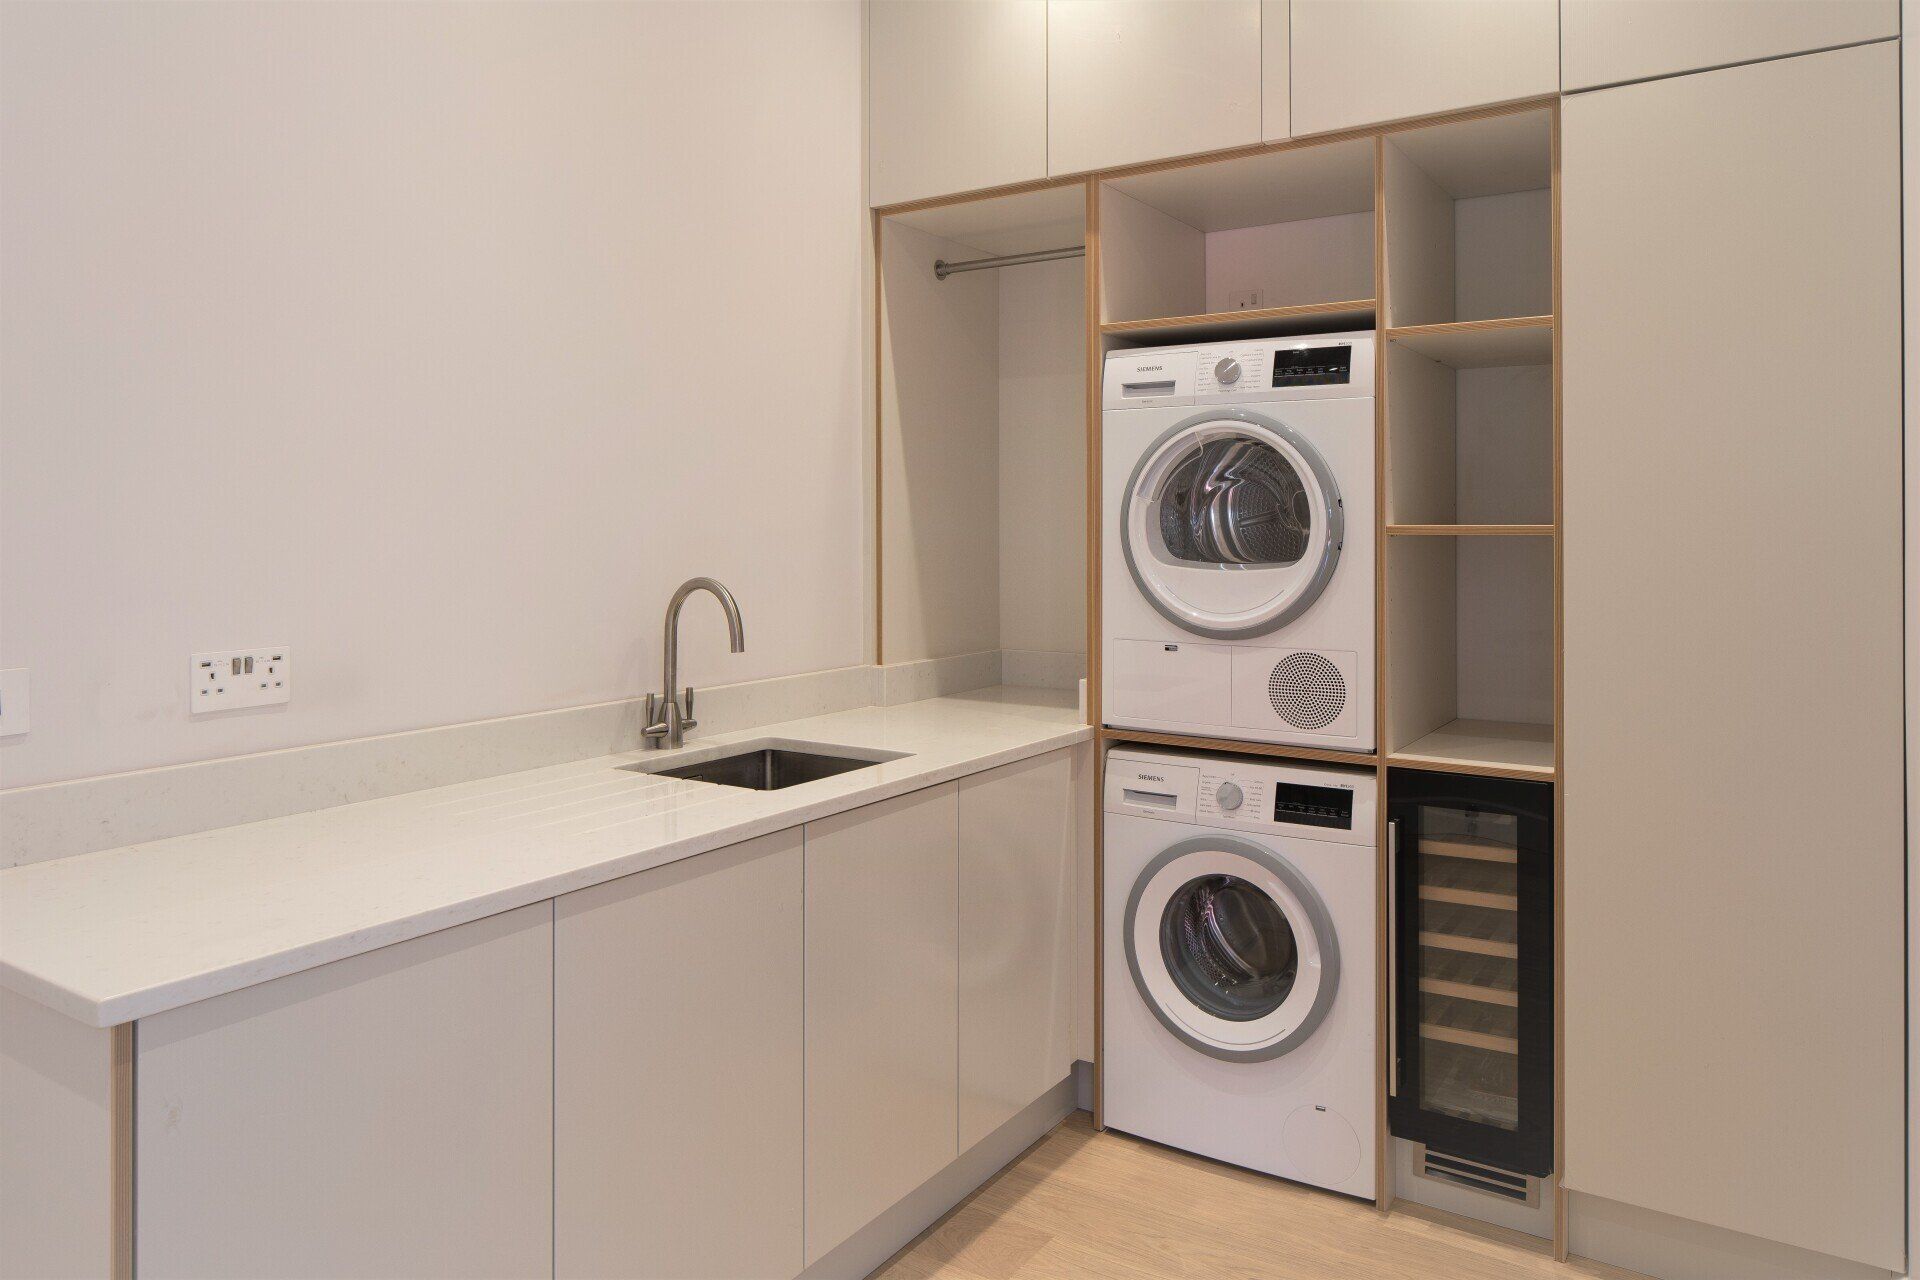 Utility room with porcelain units with plywood edging and washing machine and tumble dryer stacked on top of each other.